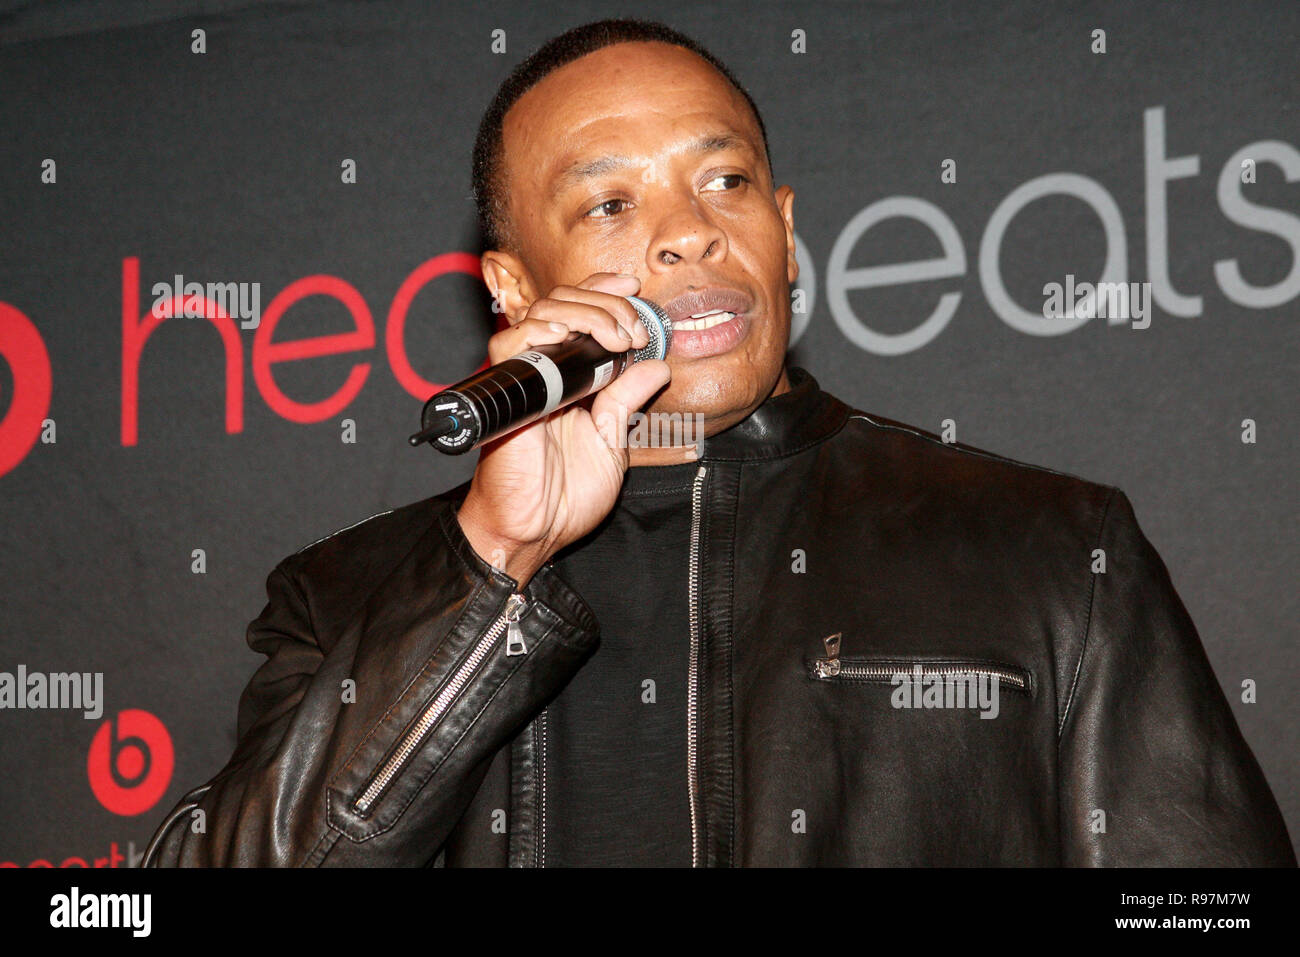 New York, NY - September 30:  Dr. Dre at The Heartbeats by Lady Gaga headphones unveiling at GILT at The New York Palace Hotel on Wednesday, September 30, 2009 in New York, NY.  (Photo by Steve Mack/S.D. Mack Pictures) Stock Photo